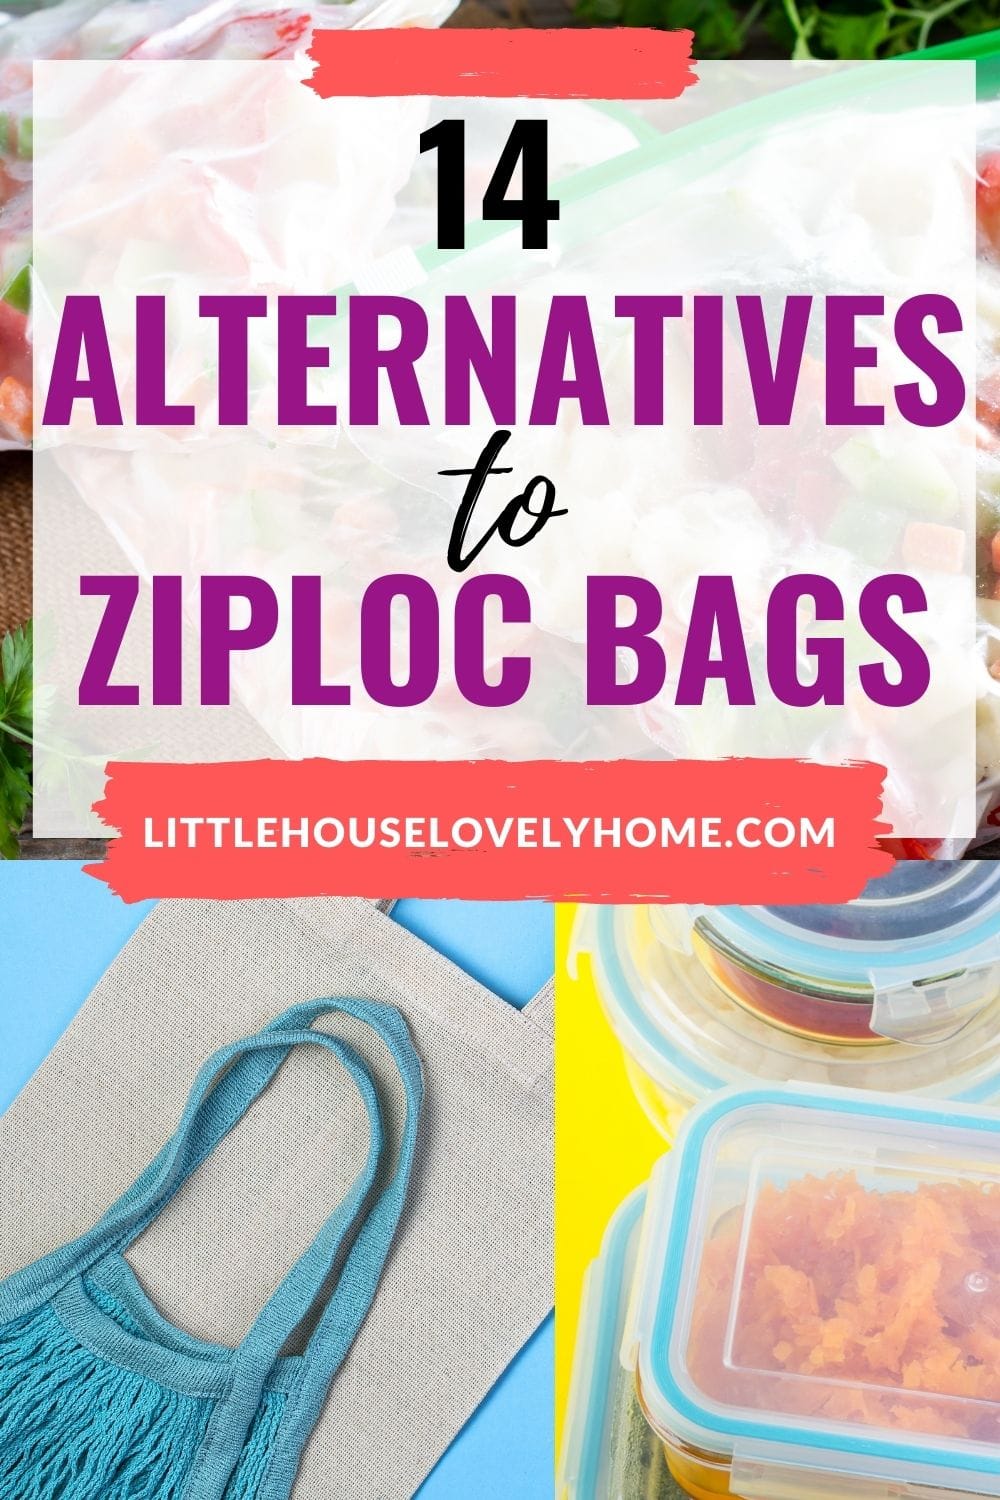 Images of reusable bags and food containers with text overlay that read 14 alternatives to Ziploc bags